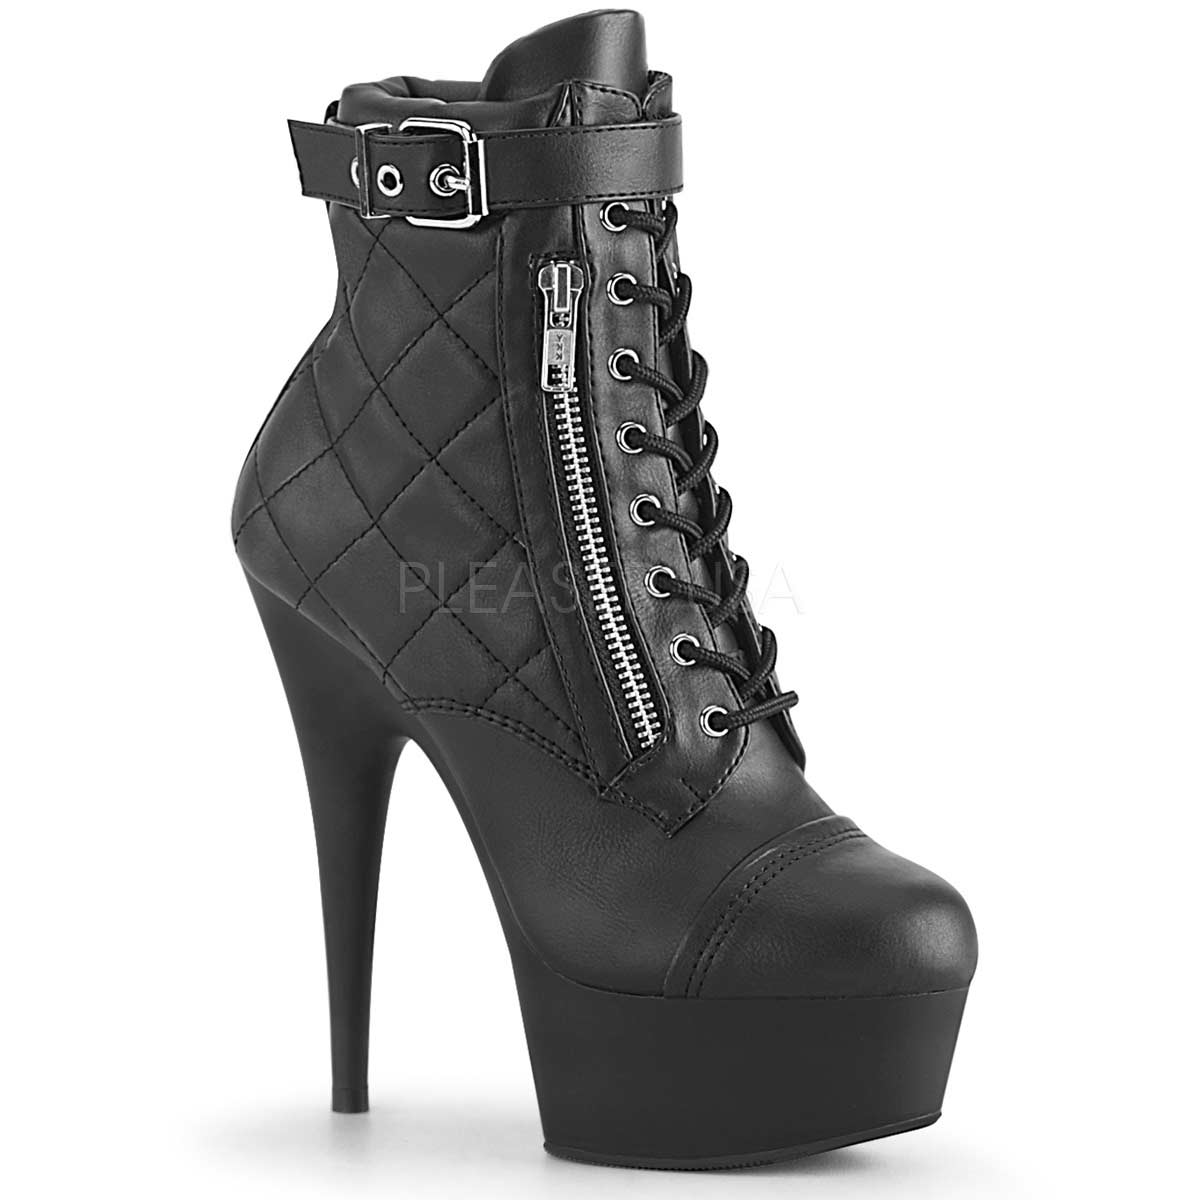 Pleaser Delight-600-05 - Black Faux Leather Matte in Sexy Boots - $98.95